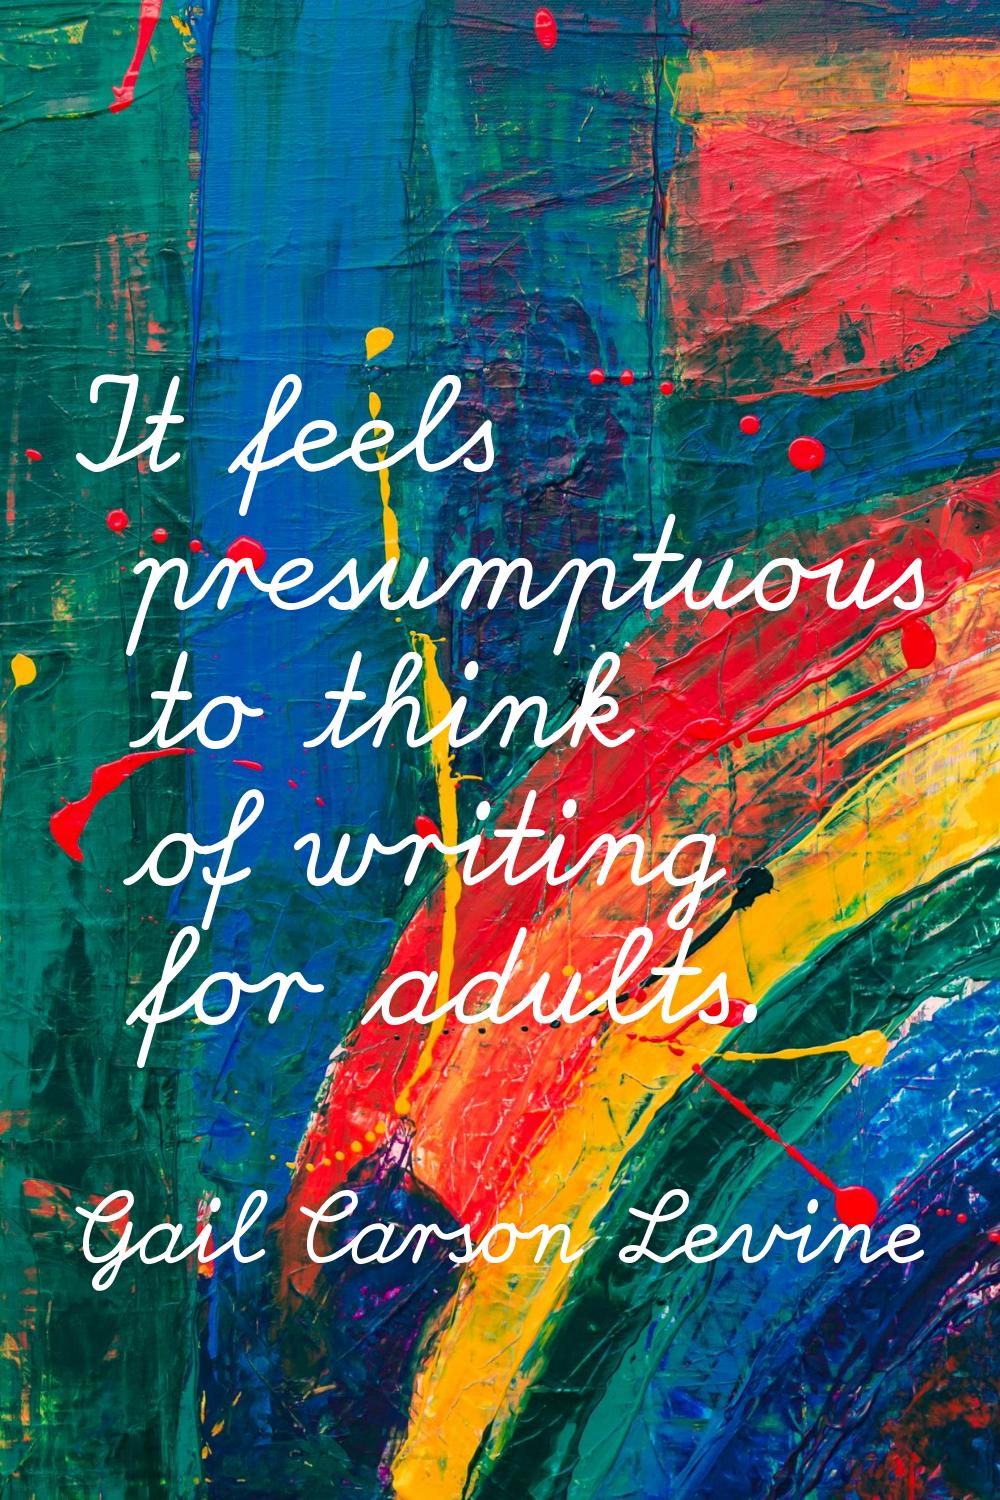 It feels presumptuous to think of writing for adults.